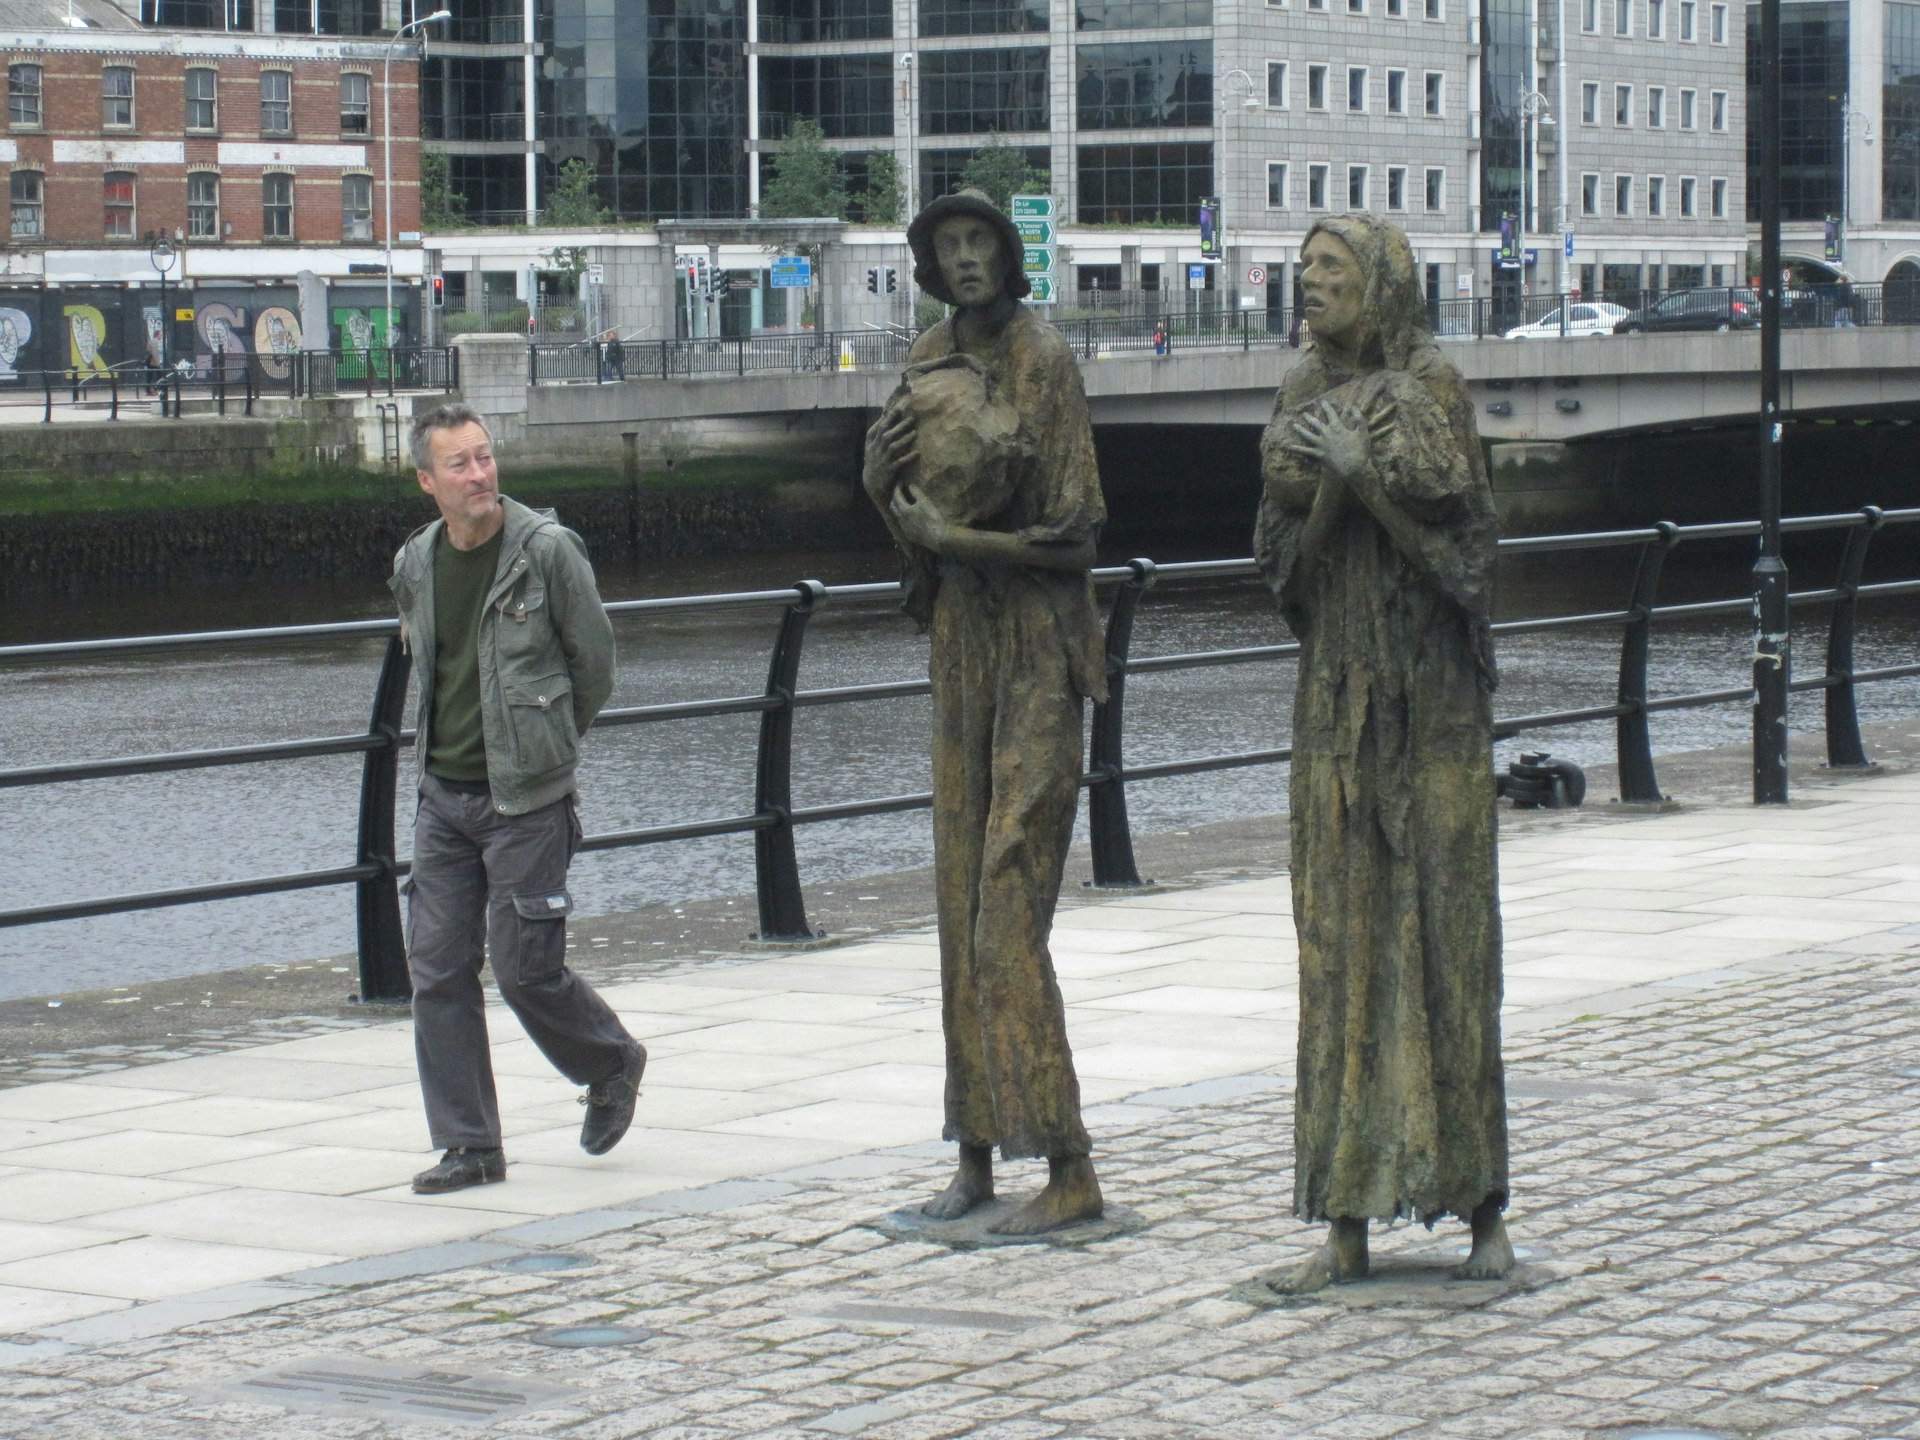 A man walks past a memorial to the Great Famine in Ireland - a sculpture of two emaciated women